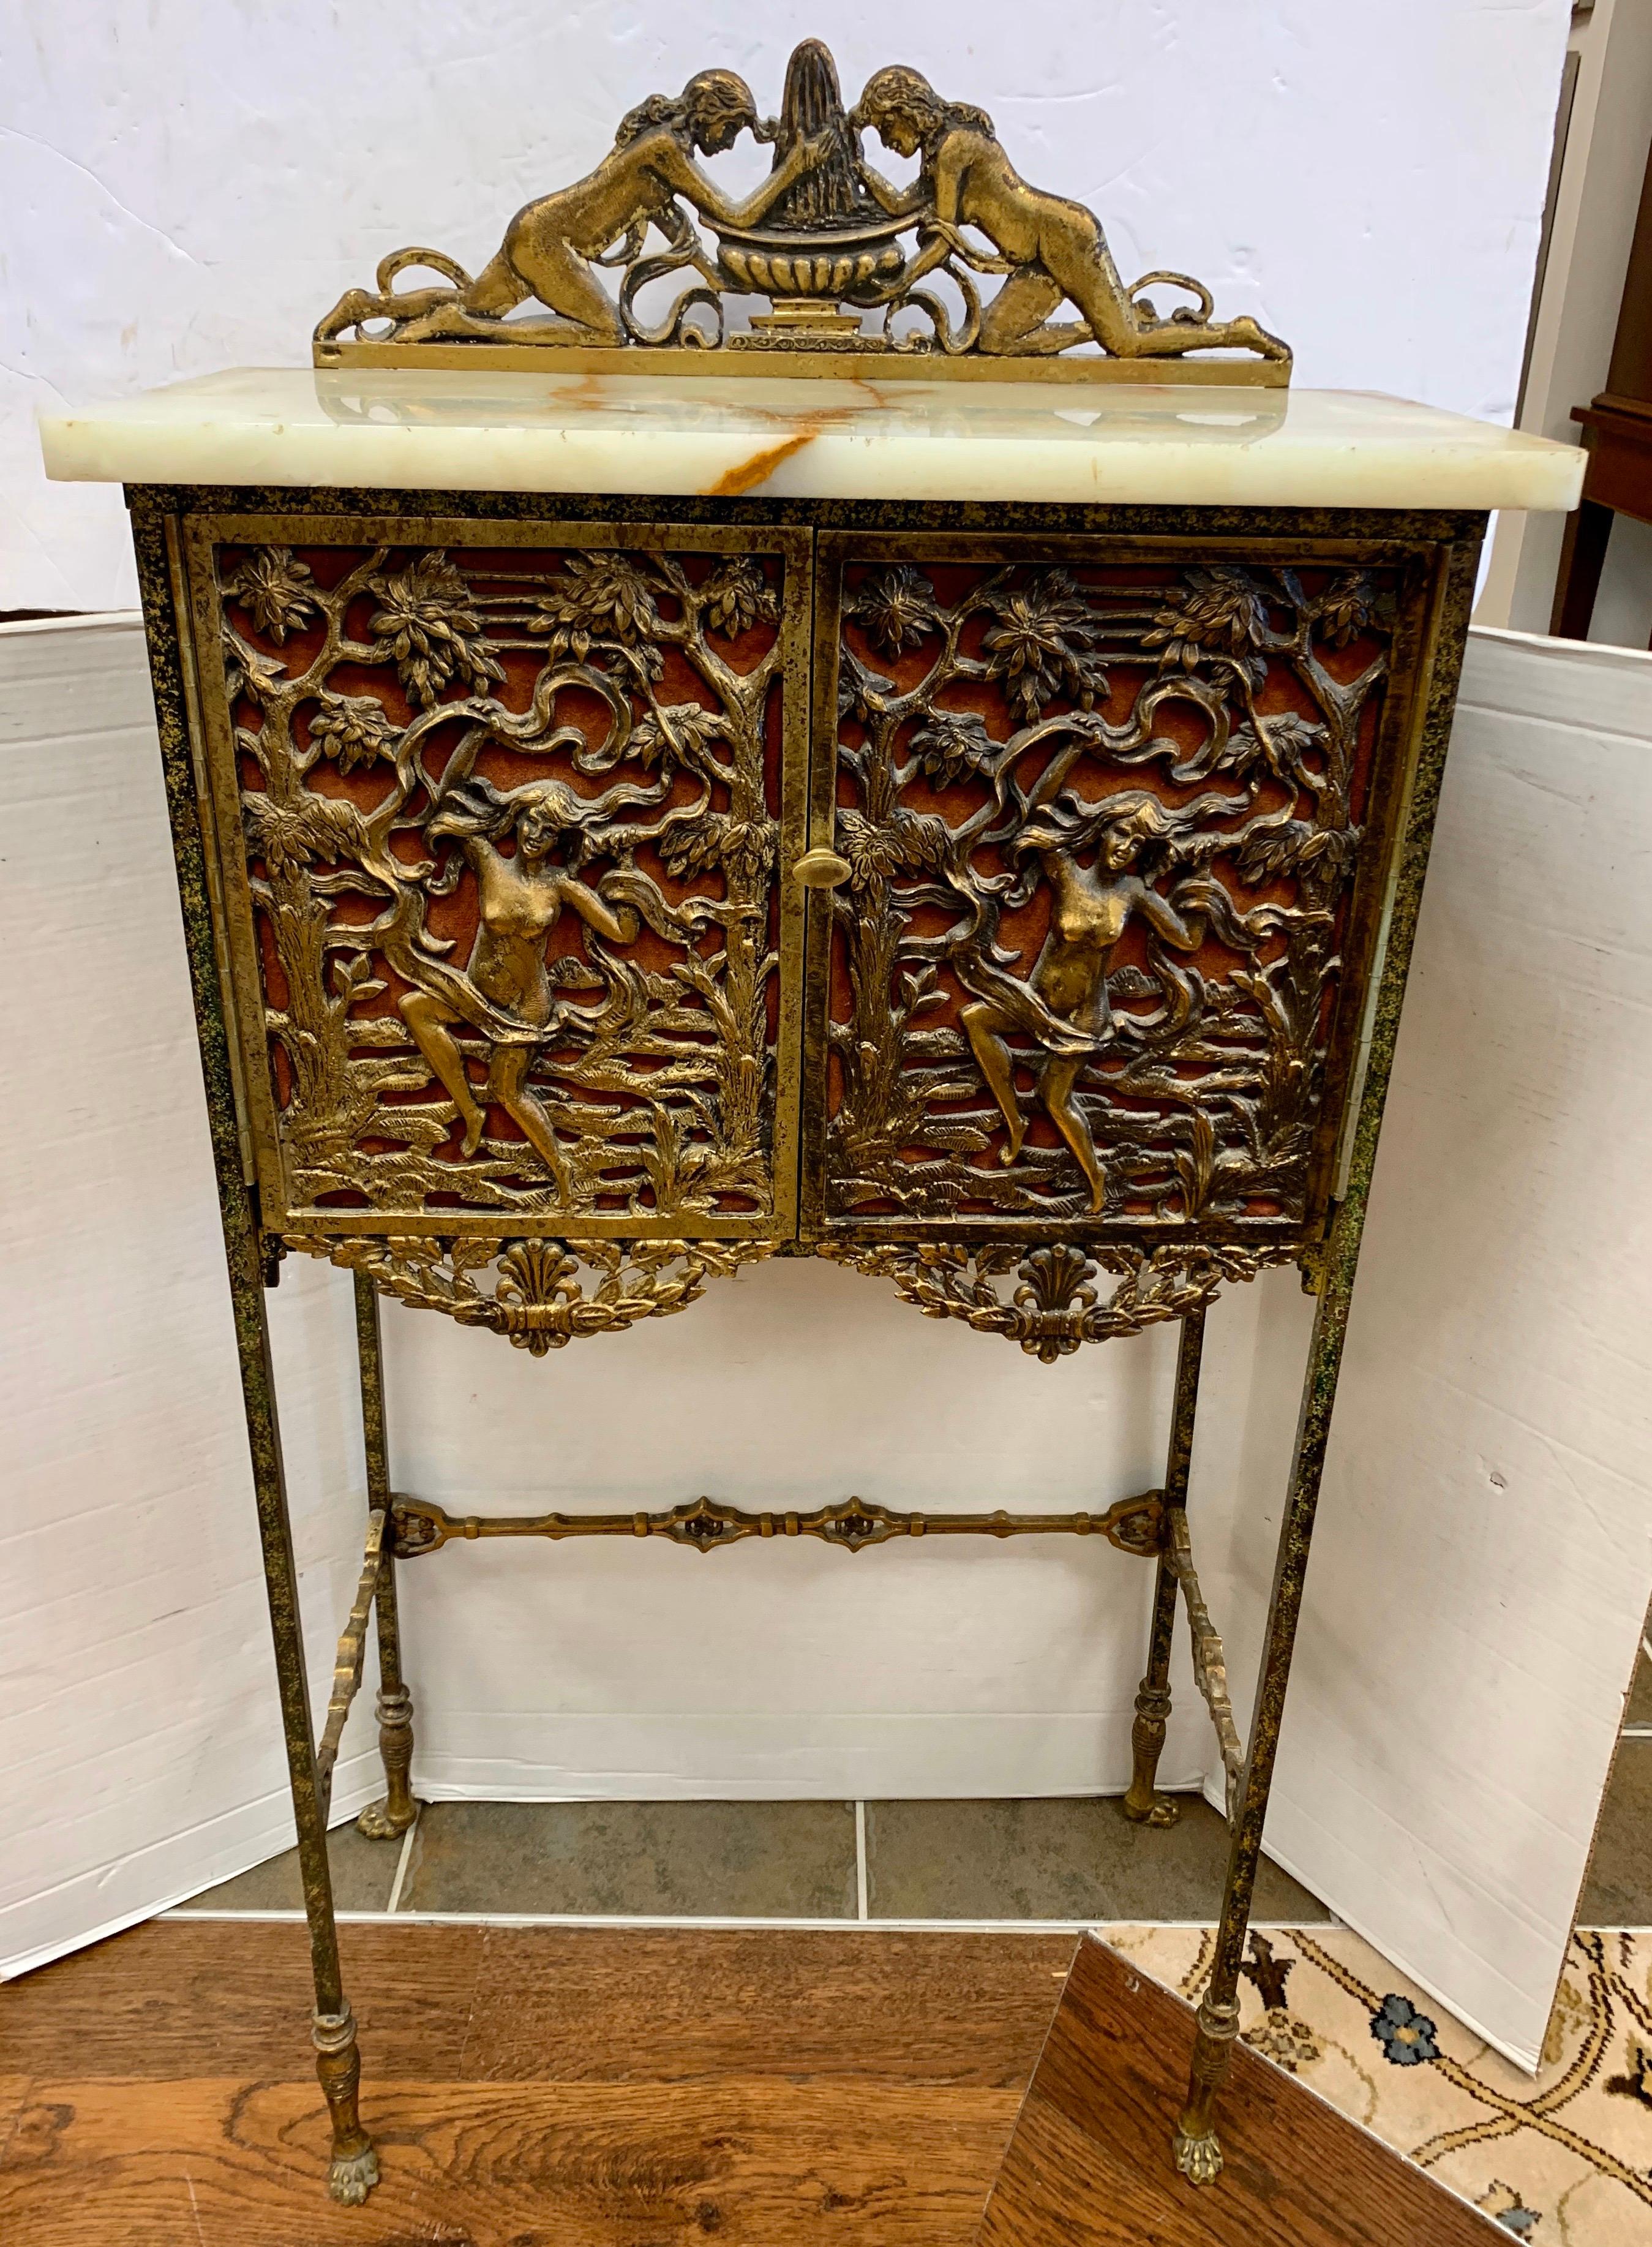 Figural bronze and iron onyx telephone stand table attributed to Oscar Bach. Features ornate bronze figures of women on the two front doors and on the sides; bronze paw feet, and onyx top. Use it as a bar or console. A unique antique piece.